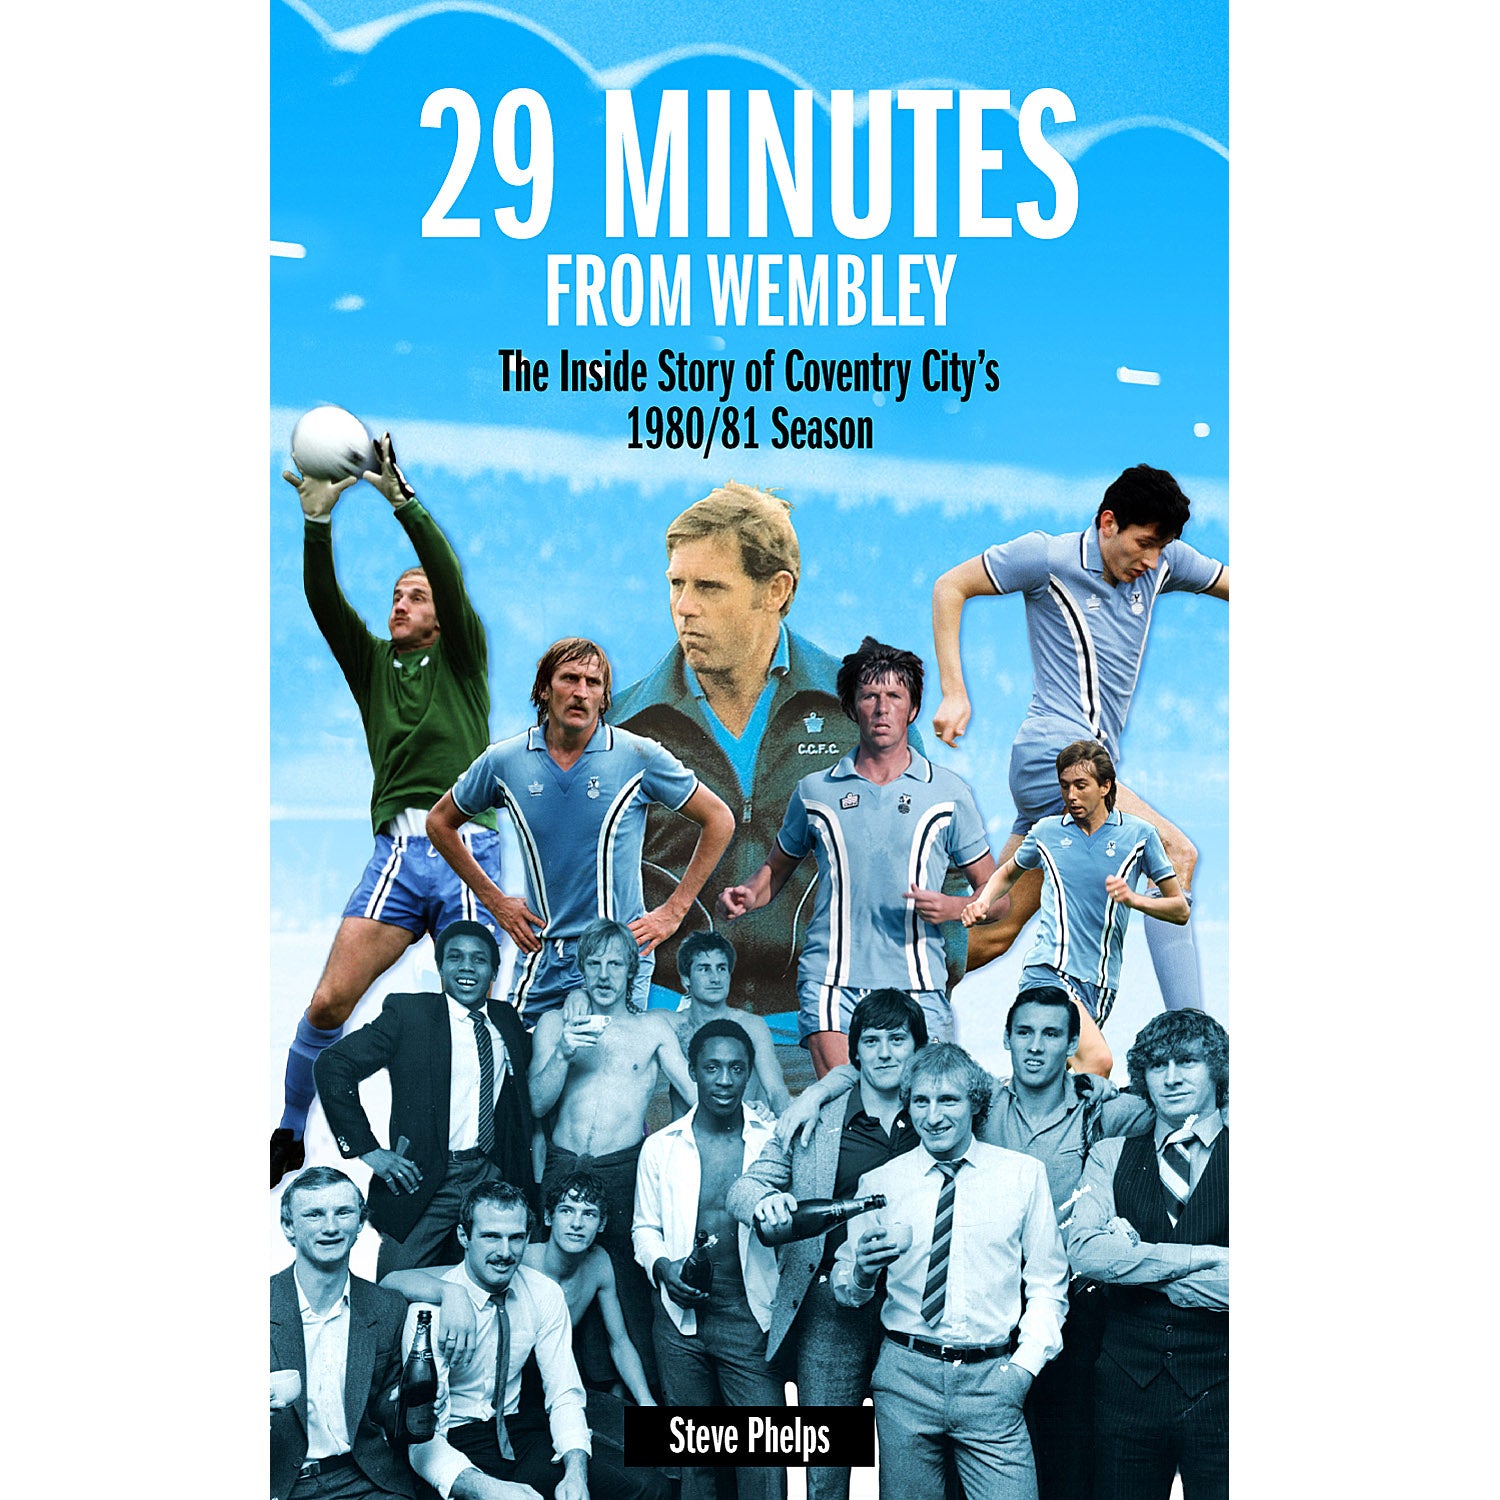 29 Minutes from Wembley – The Inside Story of Coventry City's 1980/81 Season